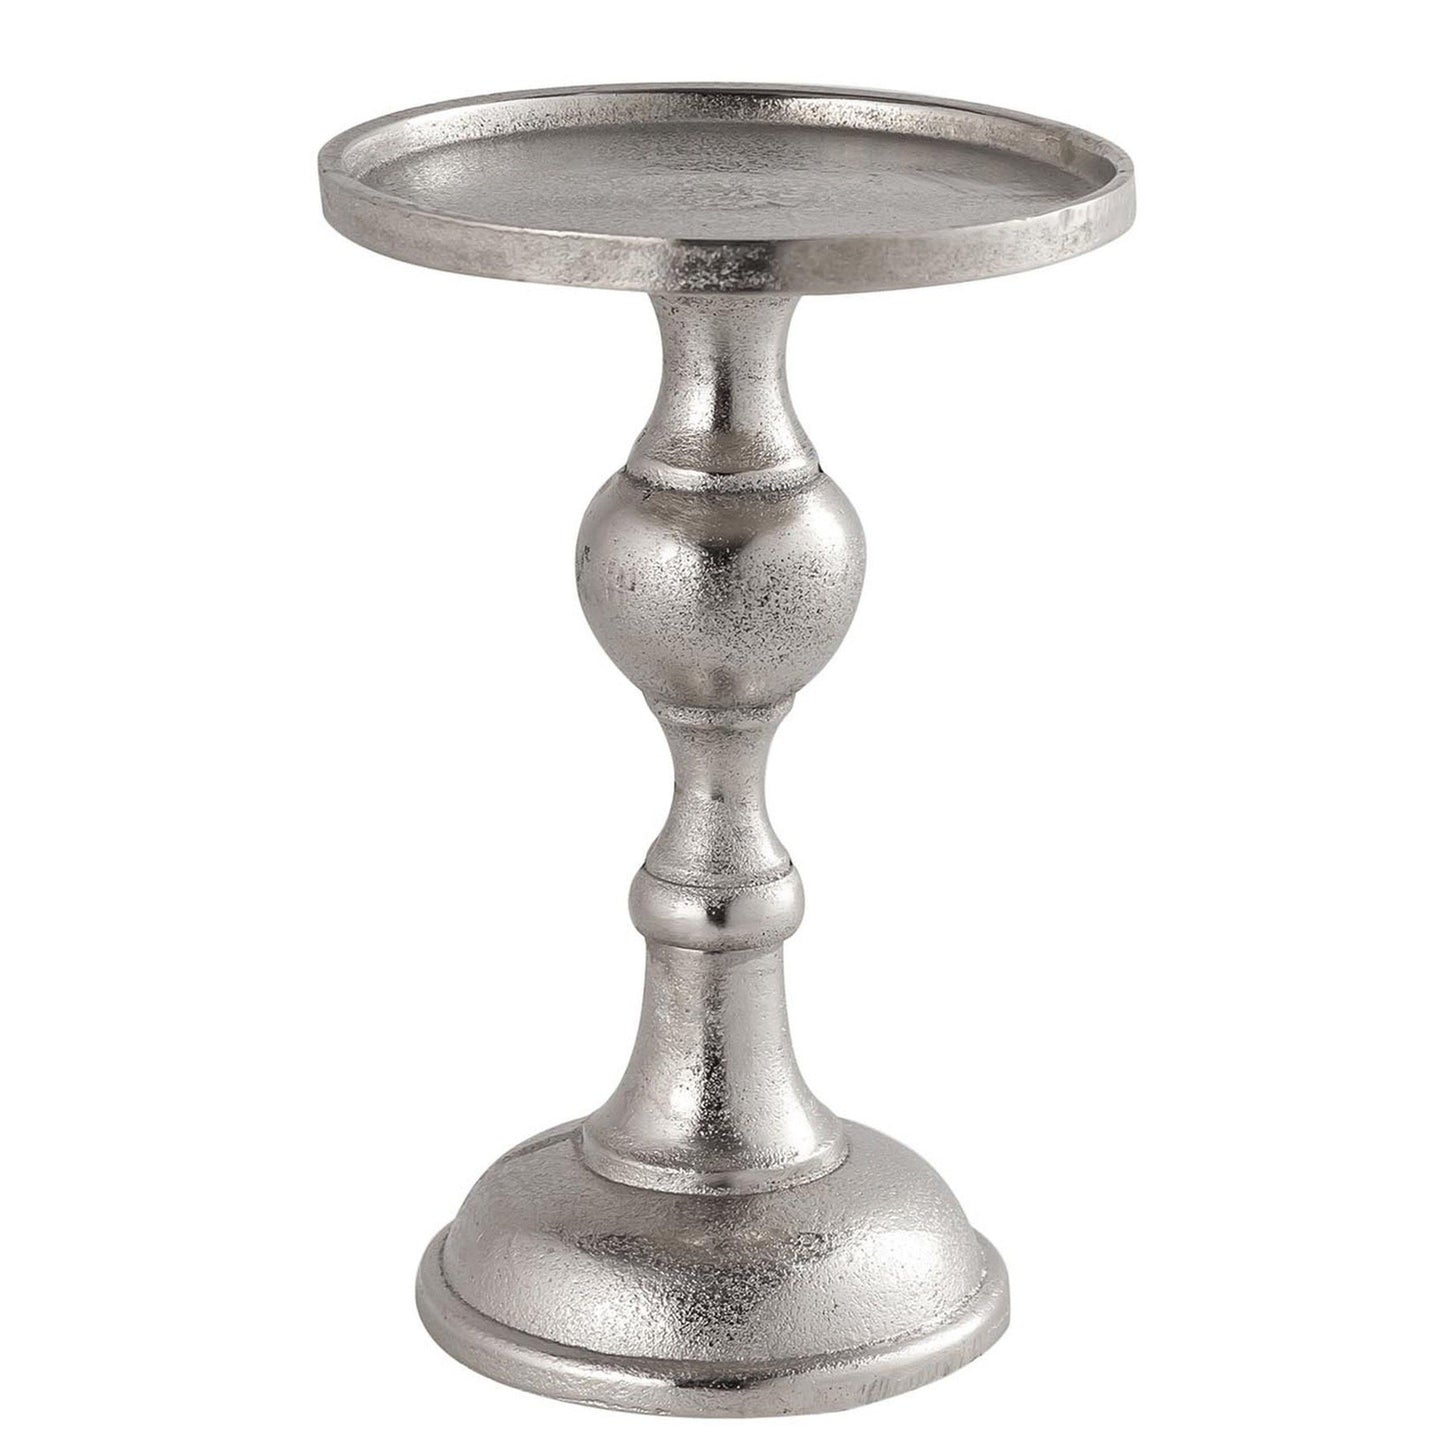 Farrah Collection Silver Large Sqaut Pillar Candle Holder